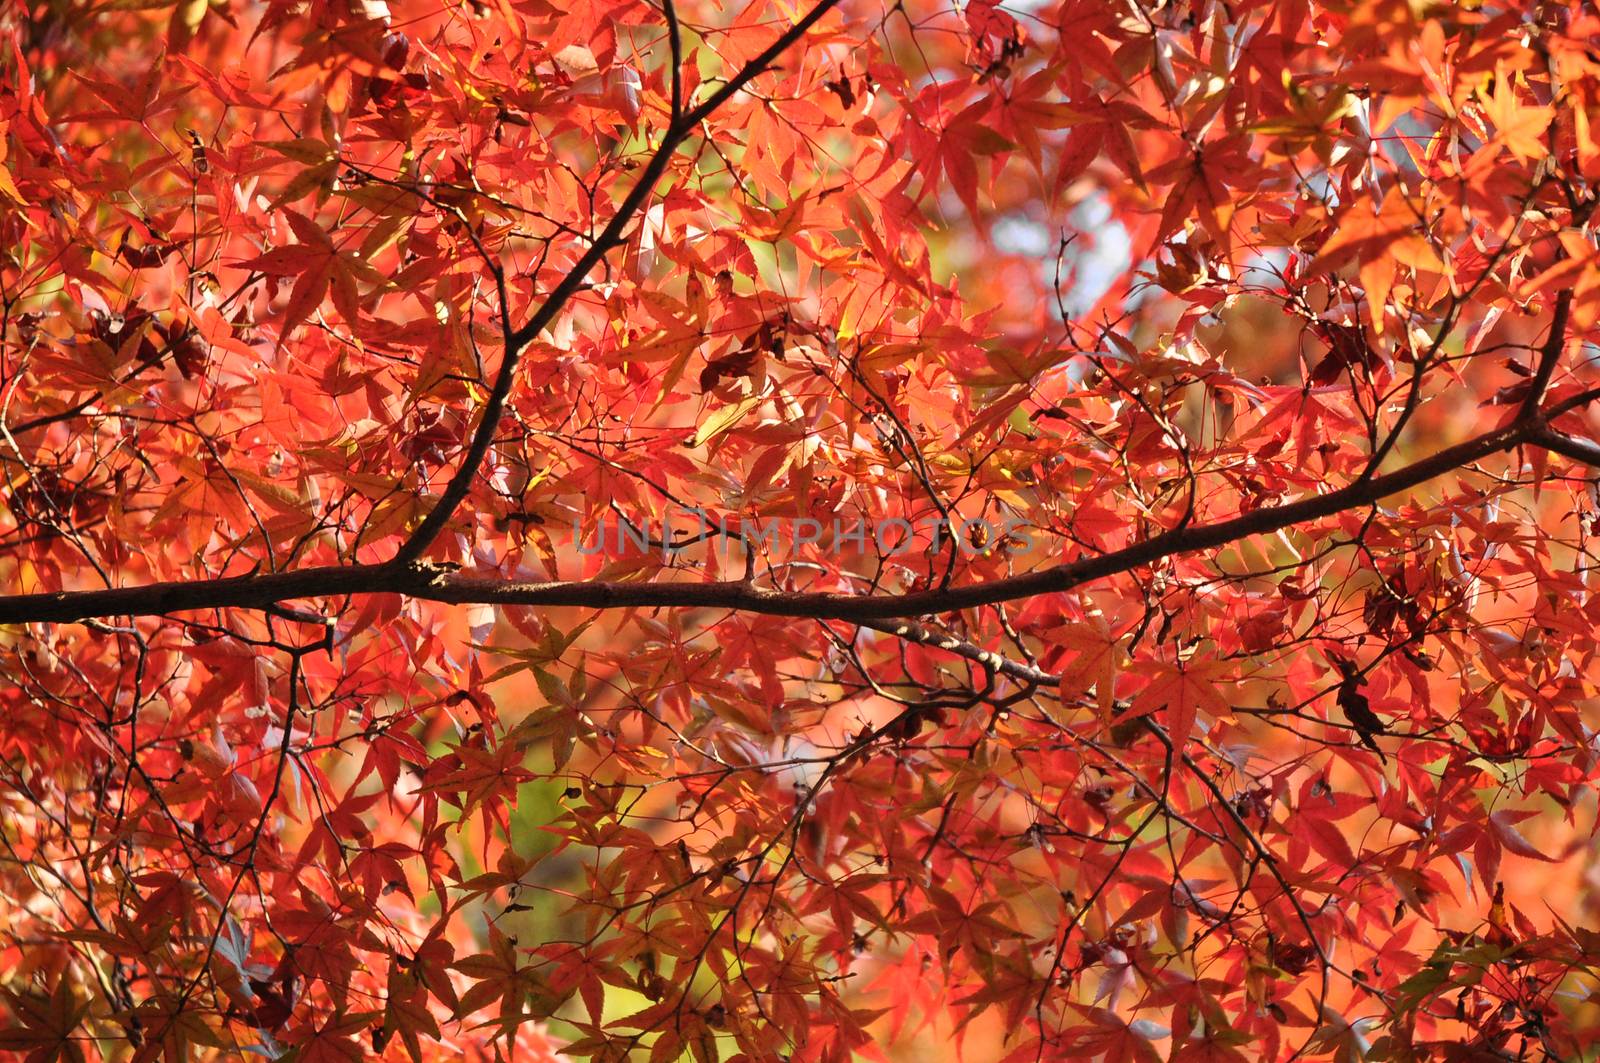 Red and orange maple leaves in Autumn in Japan by eyeofpaul